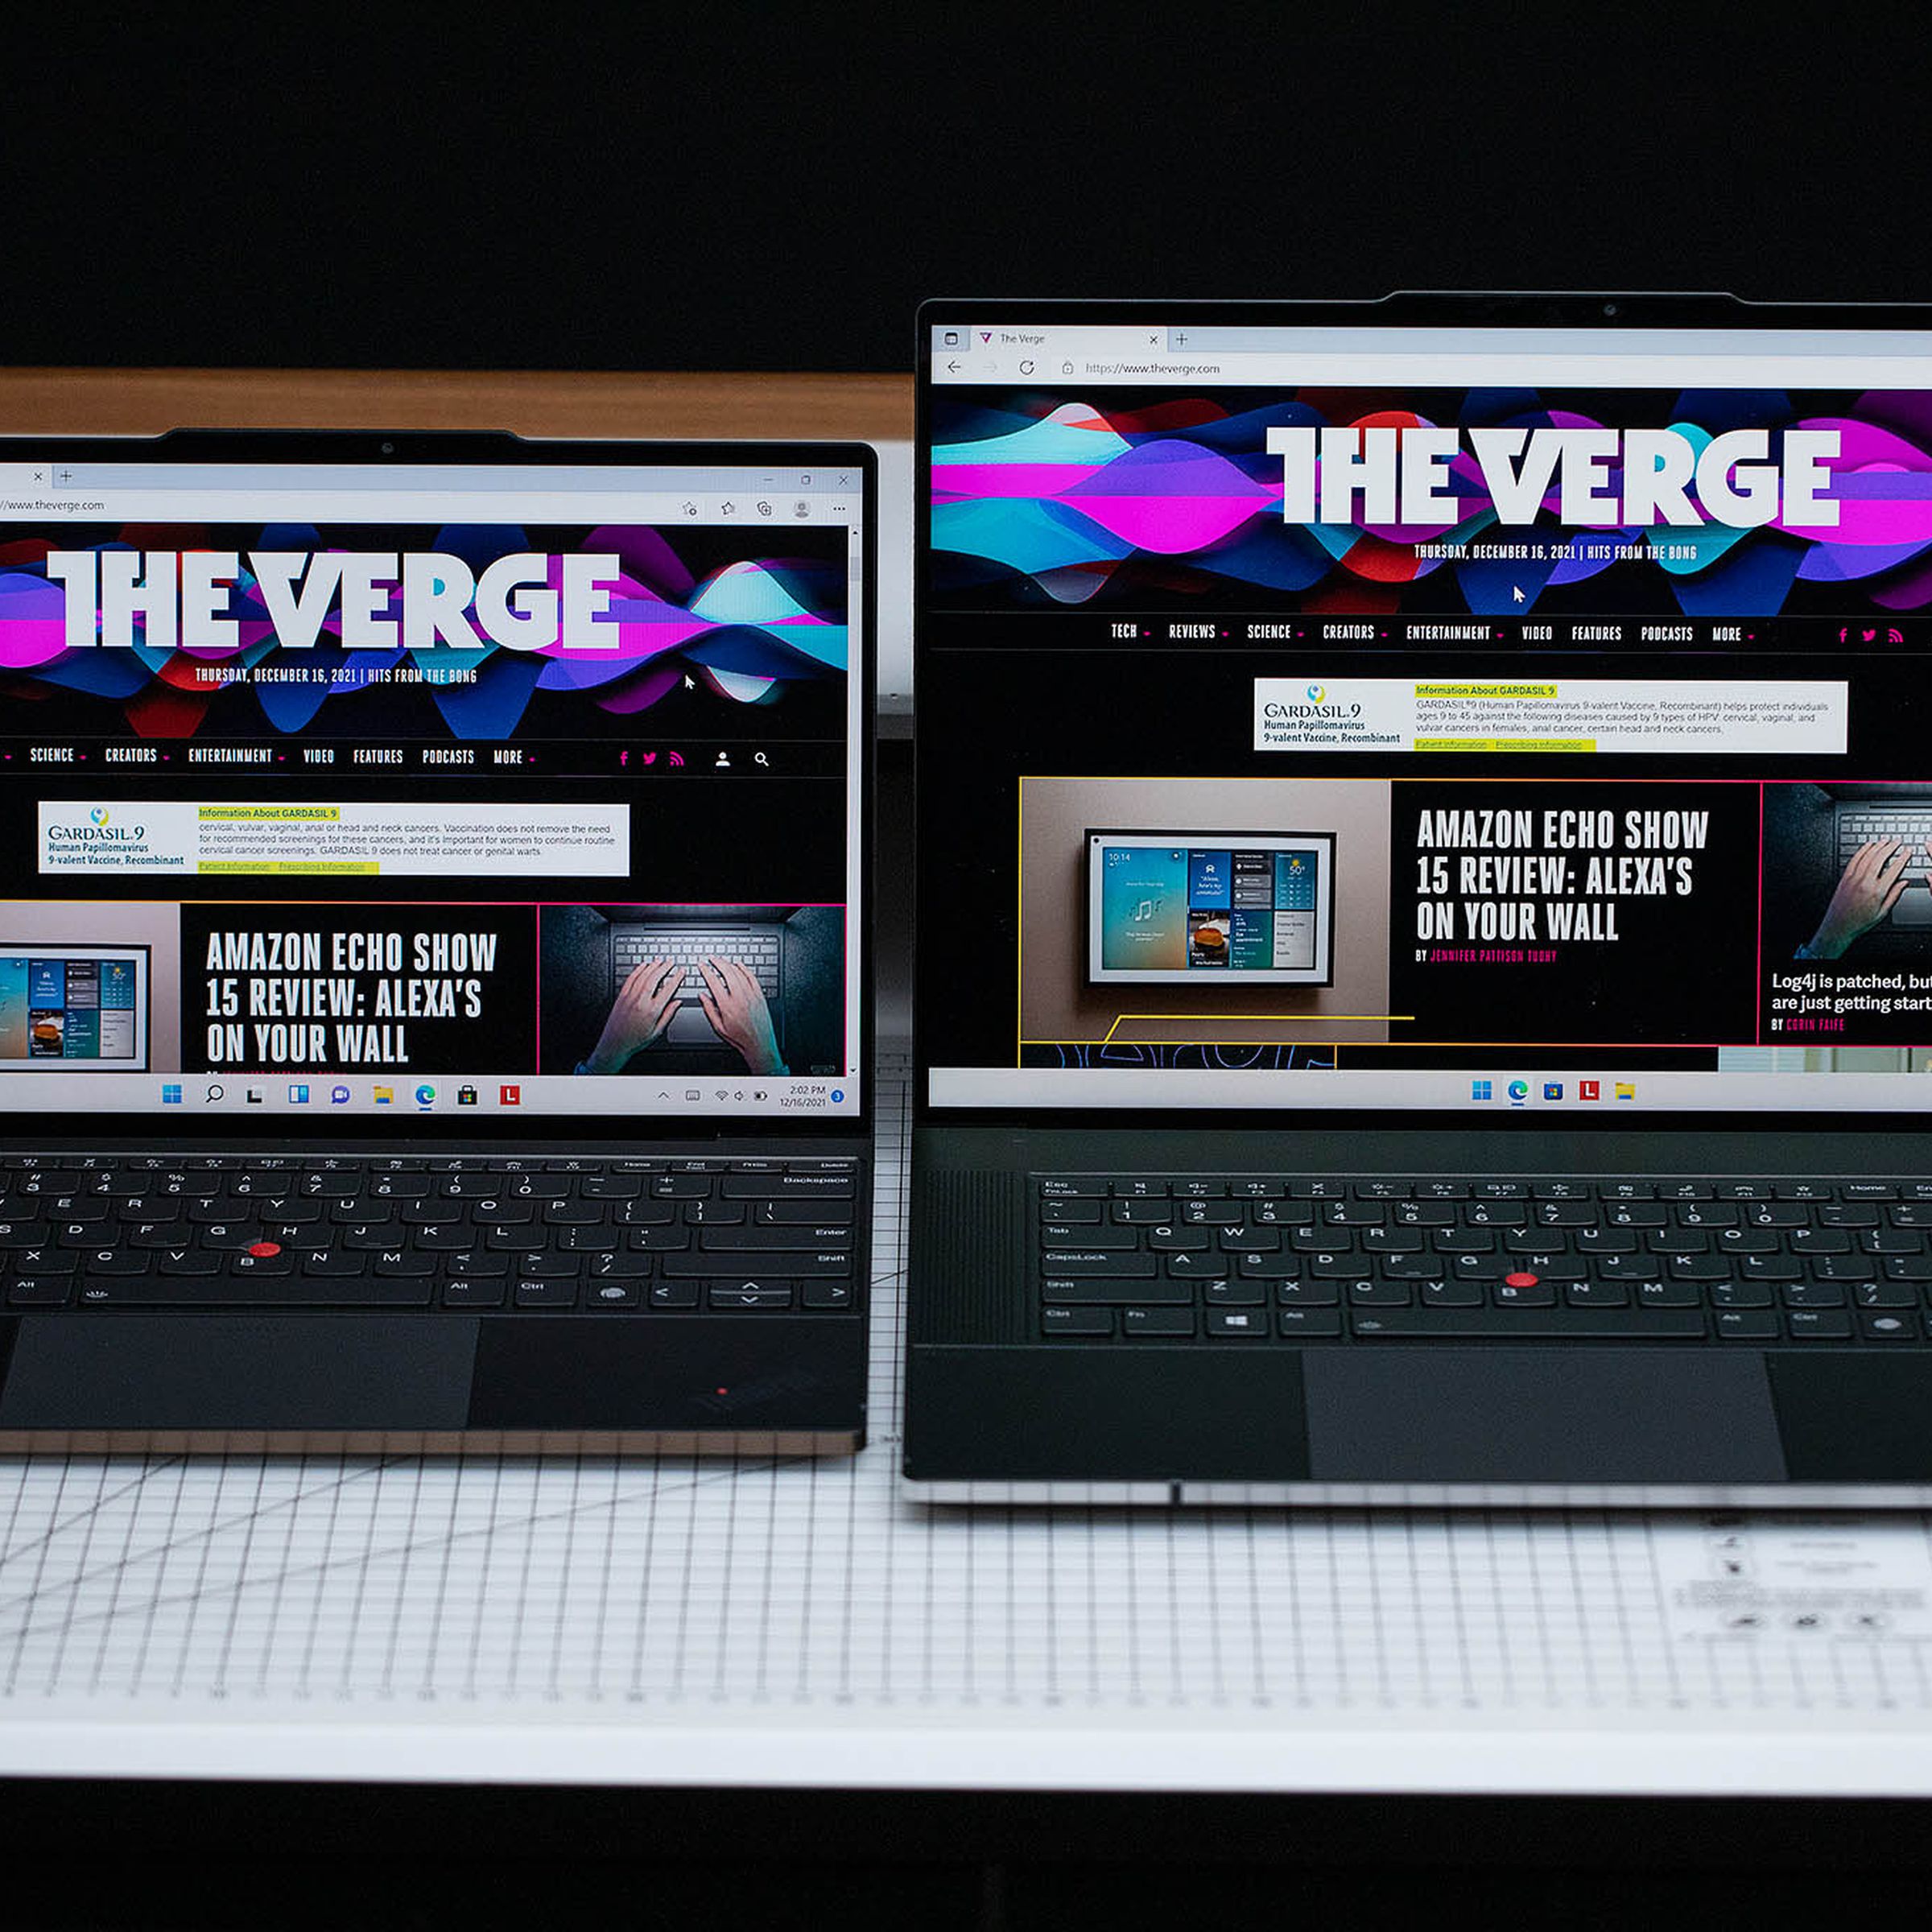 The ThinkPad Z13 and ThinkPad Z16 side-by-side on a gridded table with a black background. Both screens display The Verge homepage.